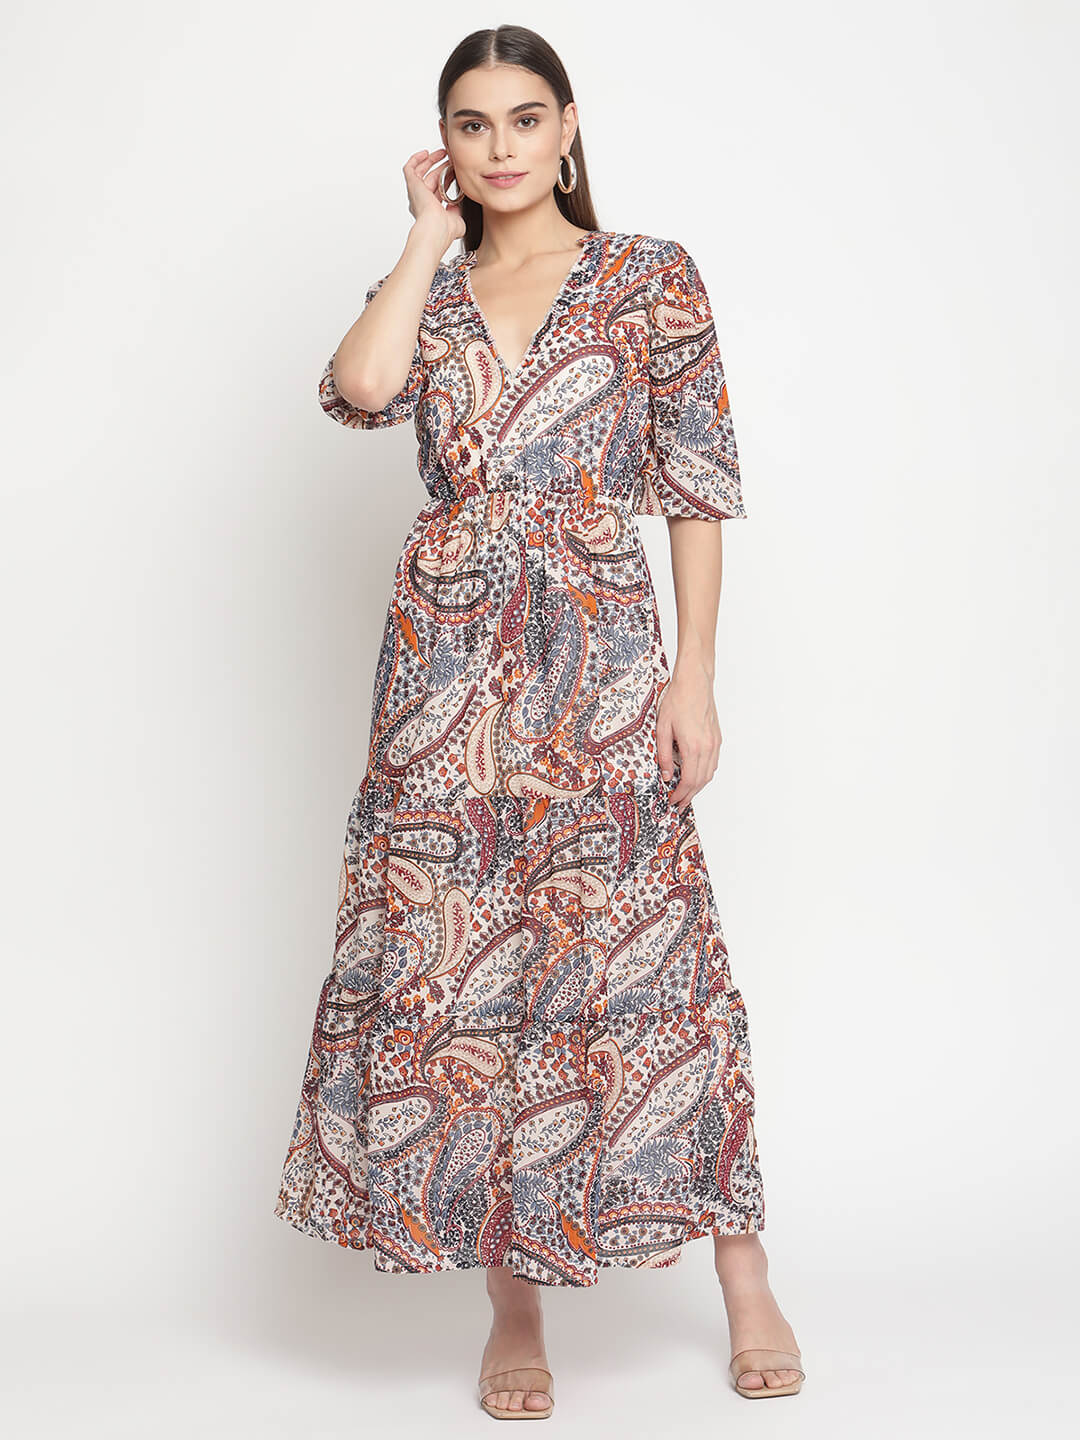 Printed Maxi Dress With Frill Details On Yoke